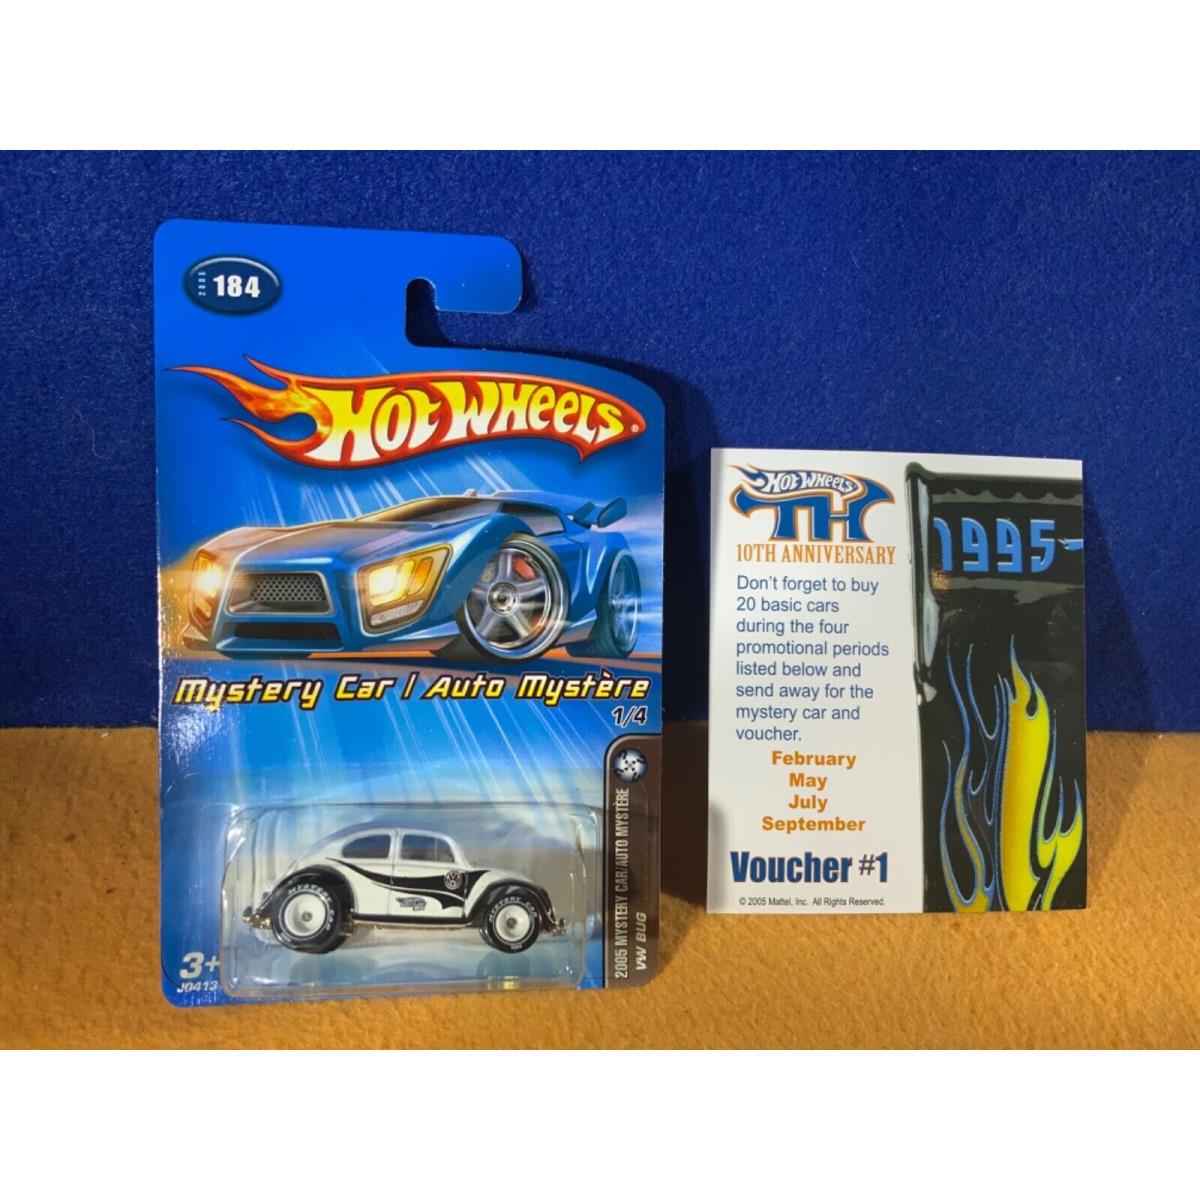 L9-97 Hot Wheels Mystery Car - VW Bug - 2005 with Voucher 1